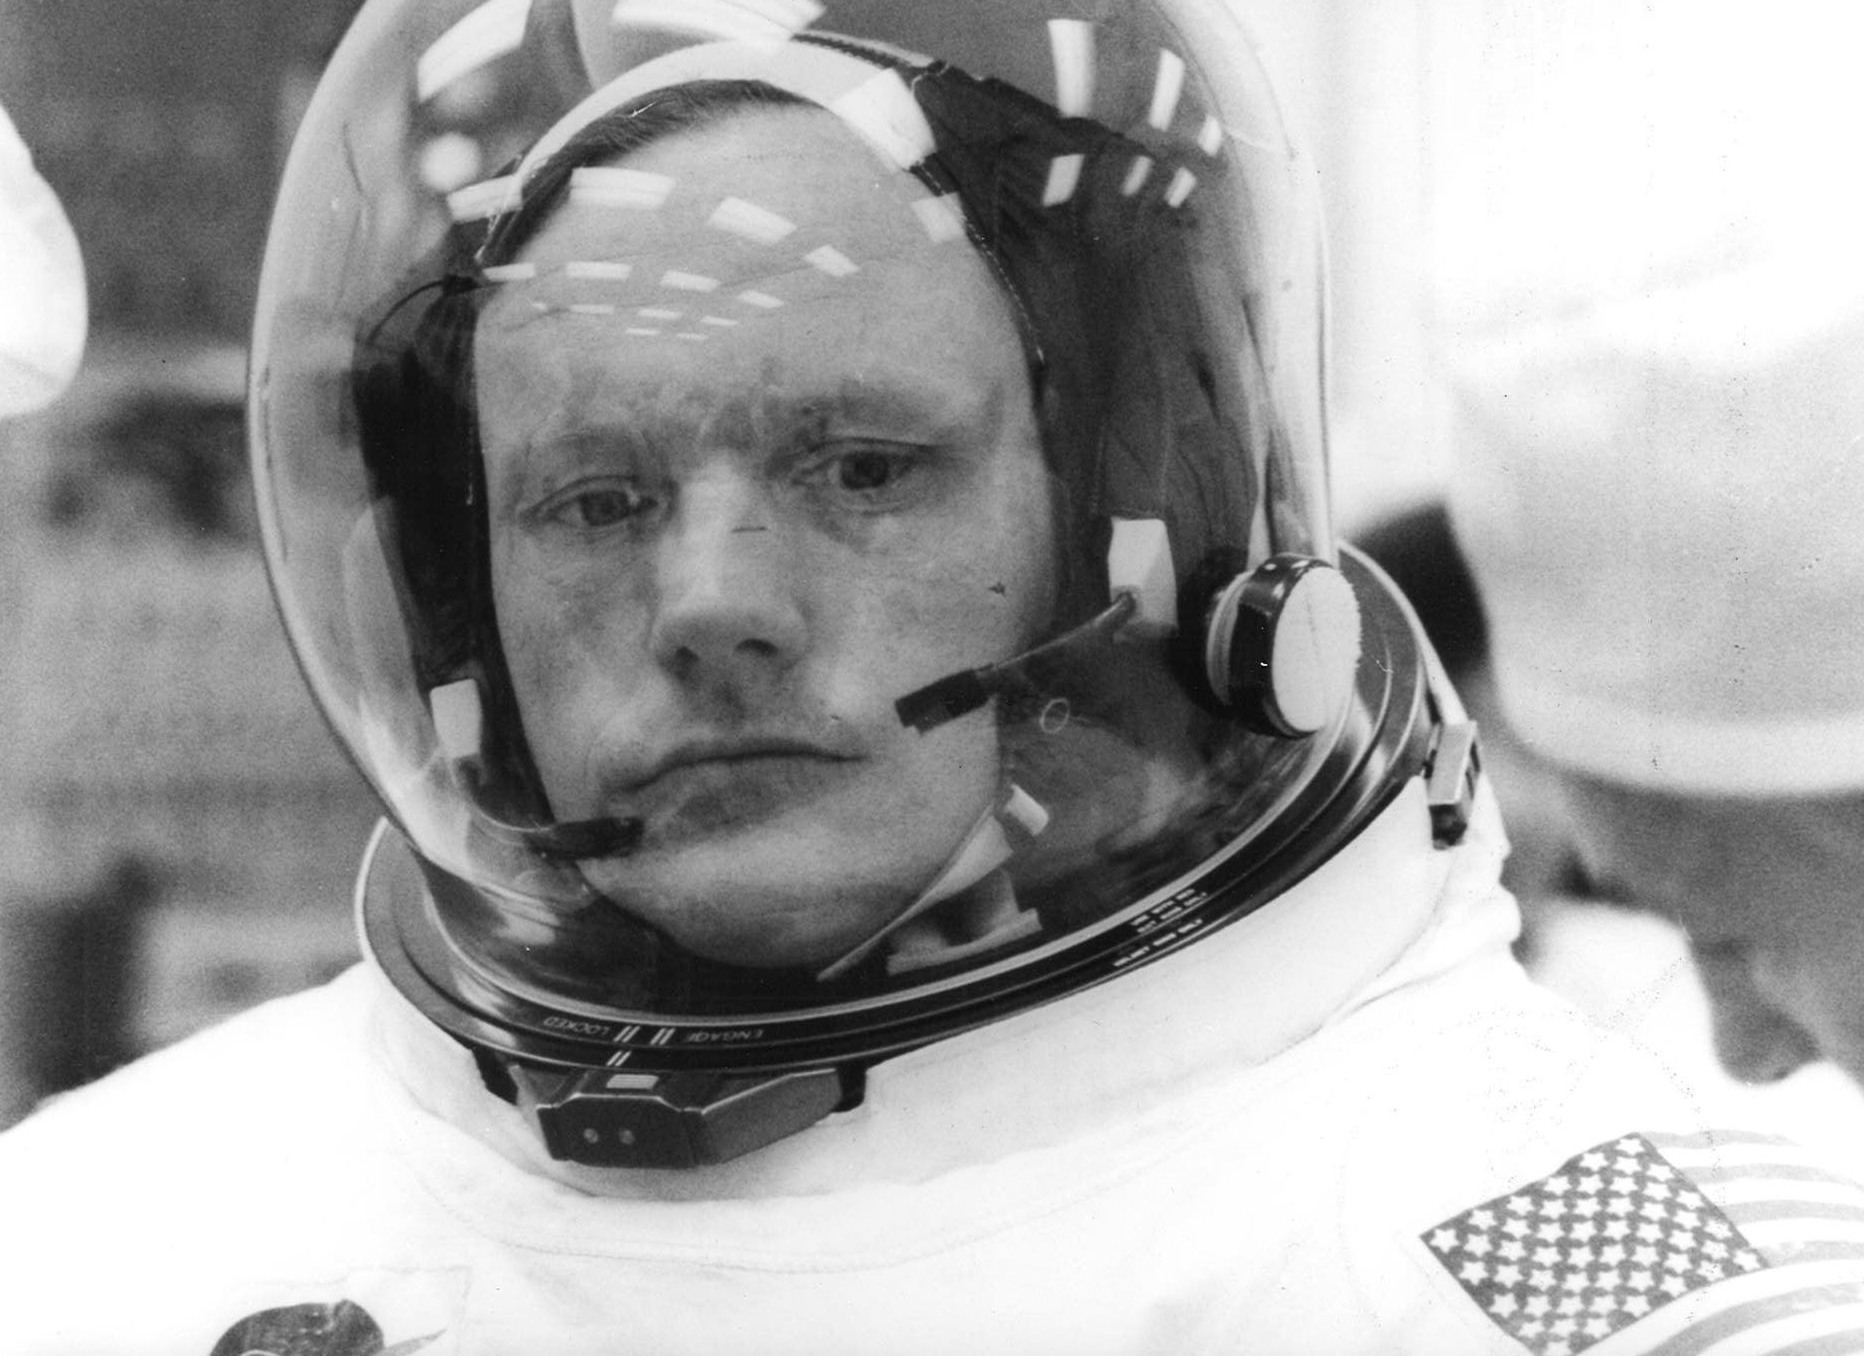 Neil Alden Armstrong, Mission Commander, Apollo 11, 16 july 1969. (NASA)